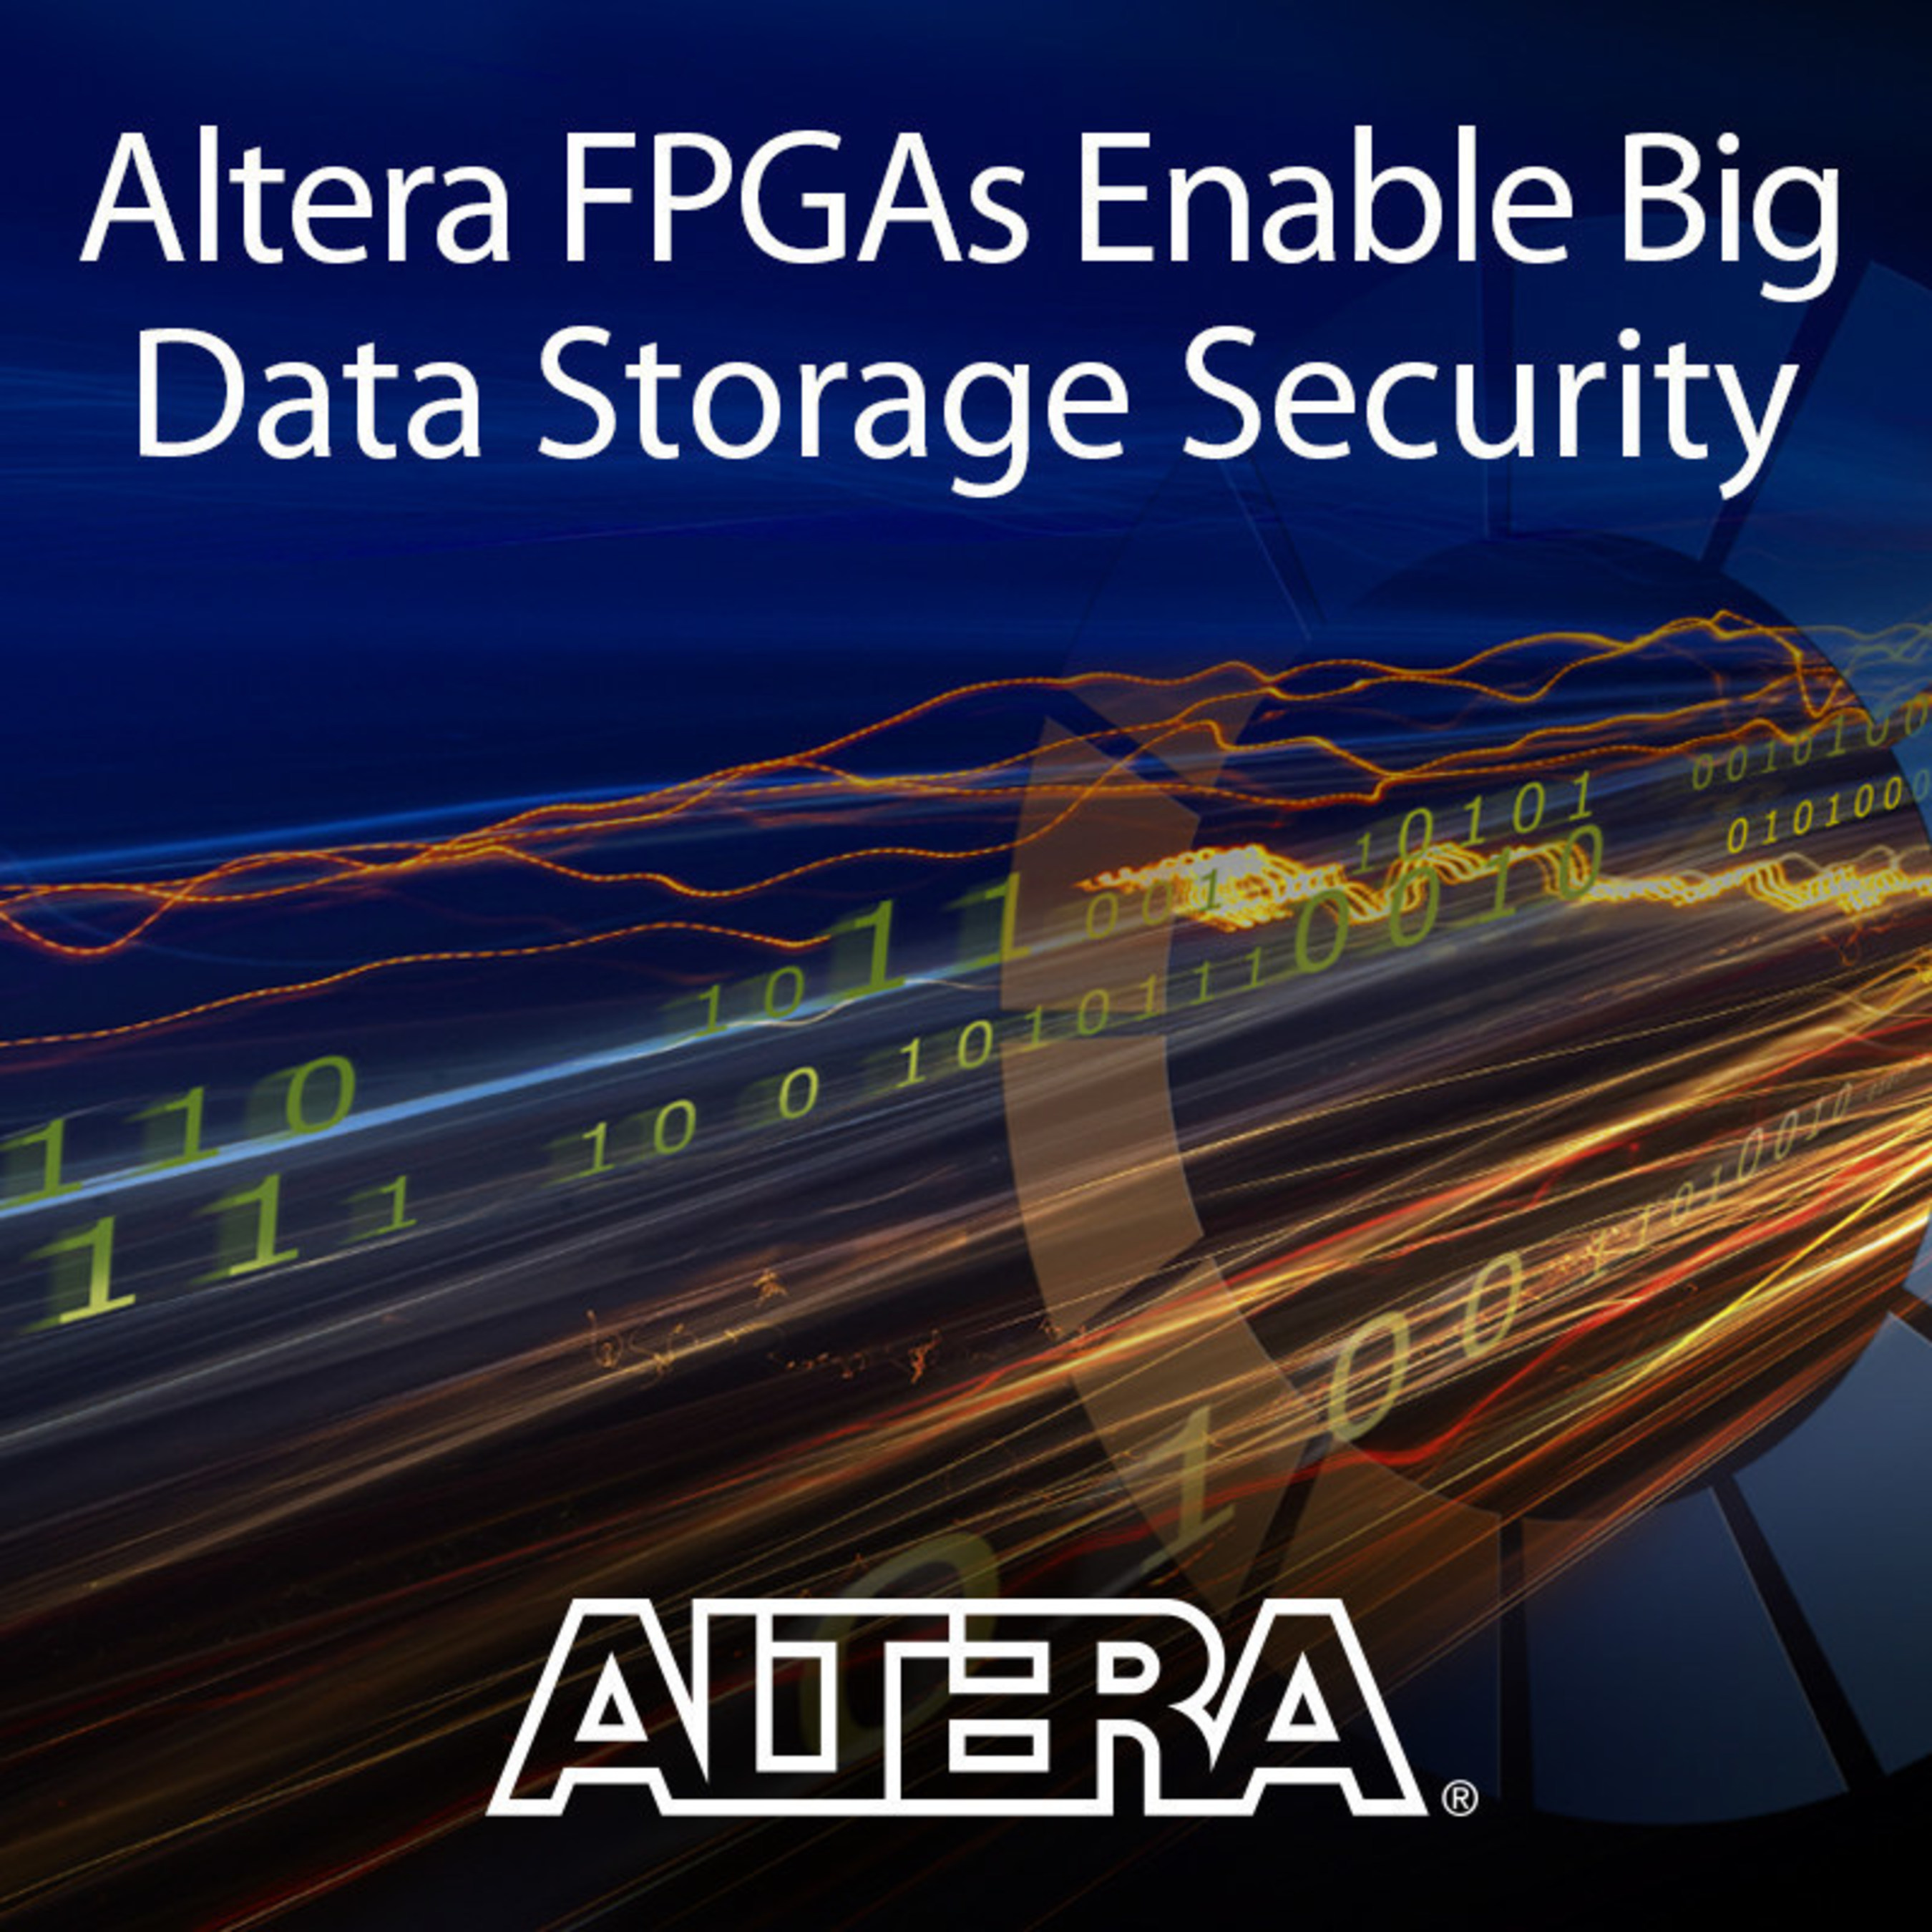 Network security pioneer Secturion Systems, Inc., selects Altera's Arria 10 FPGAs for encryption network appliance product line.